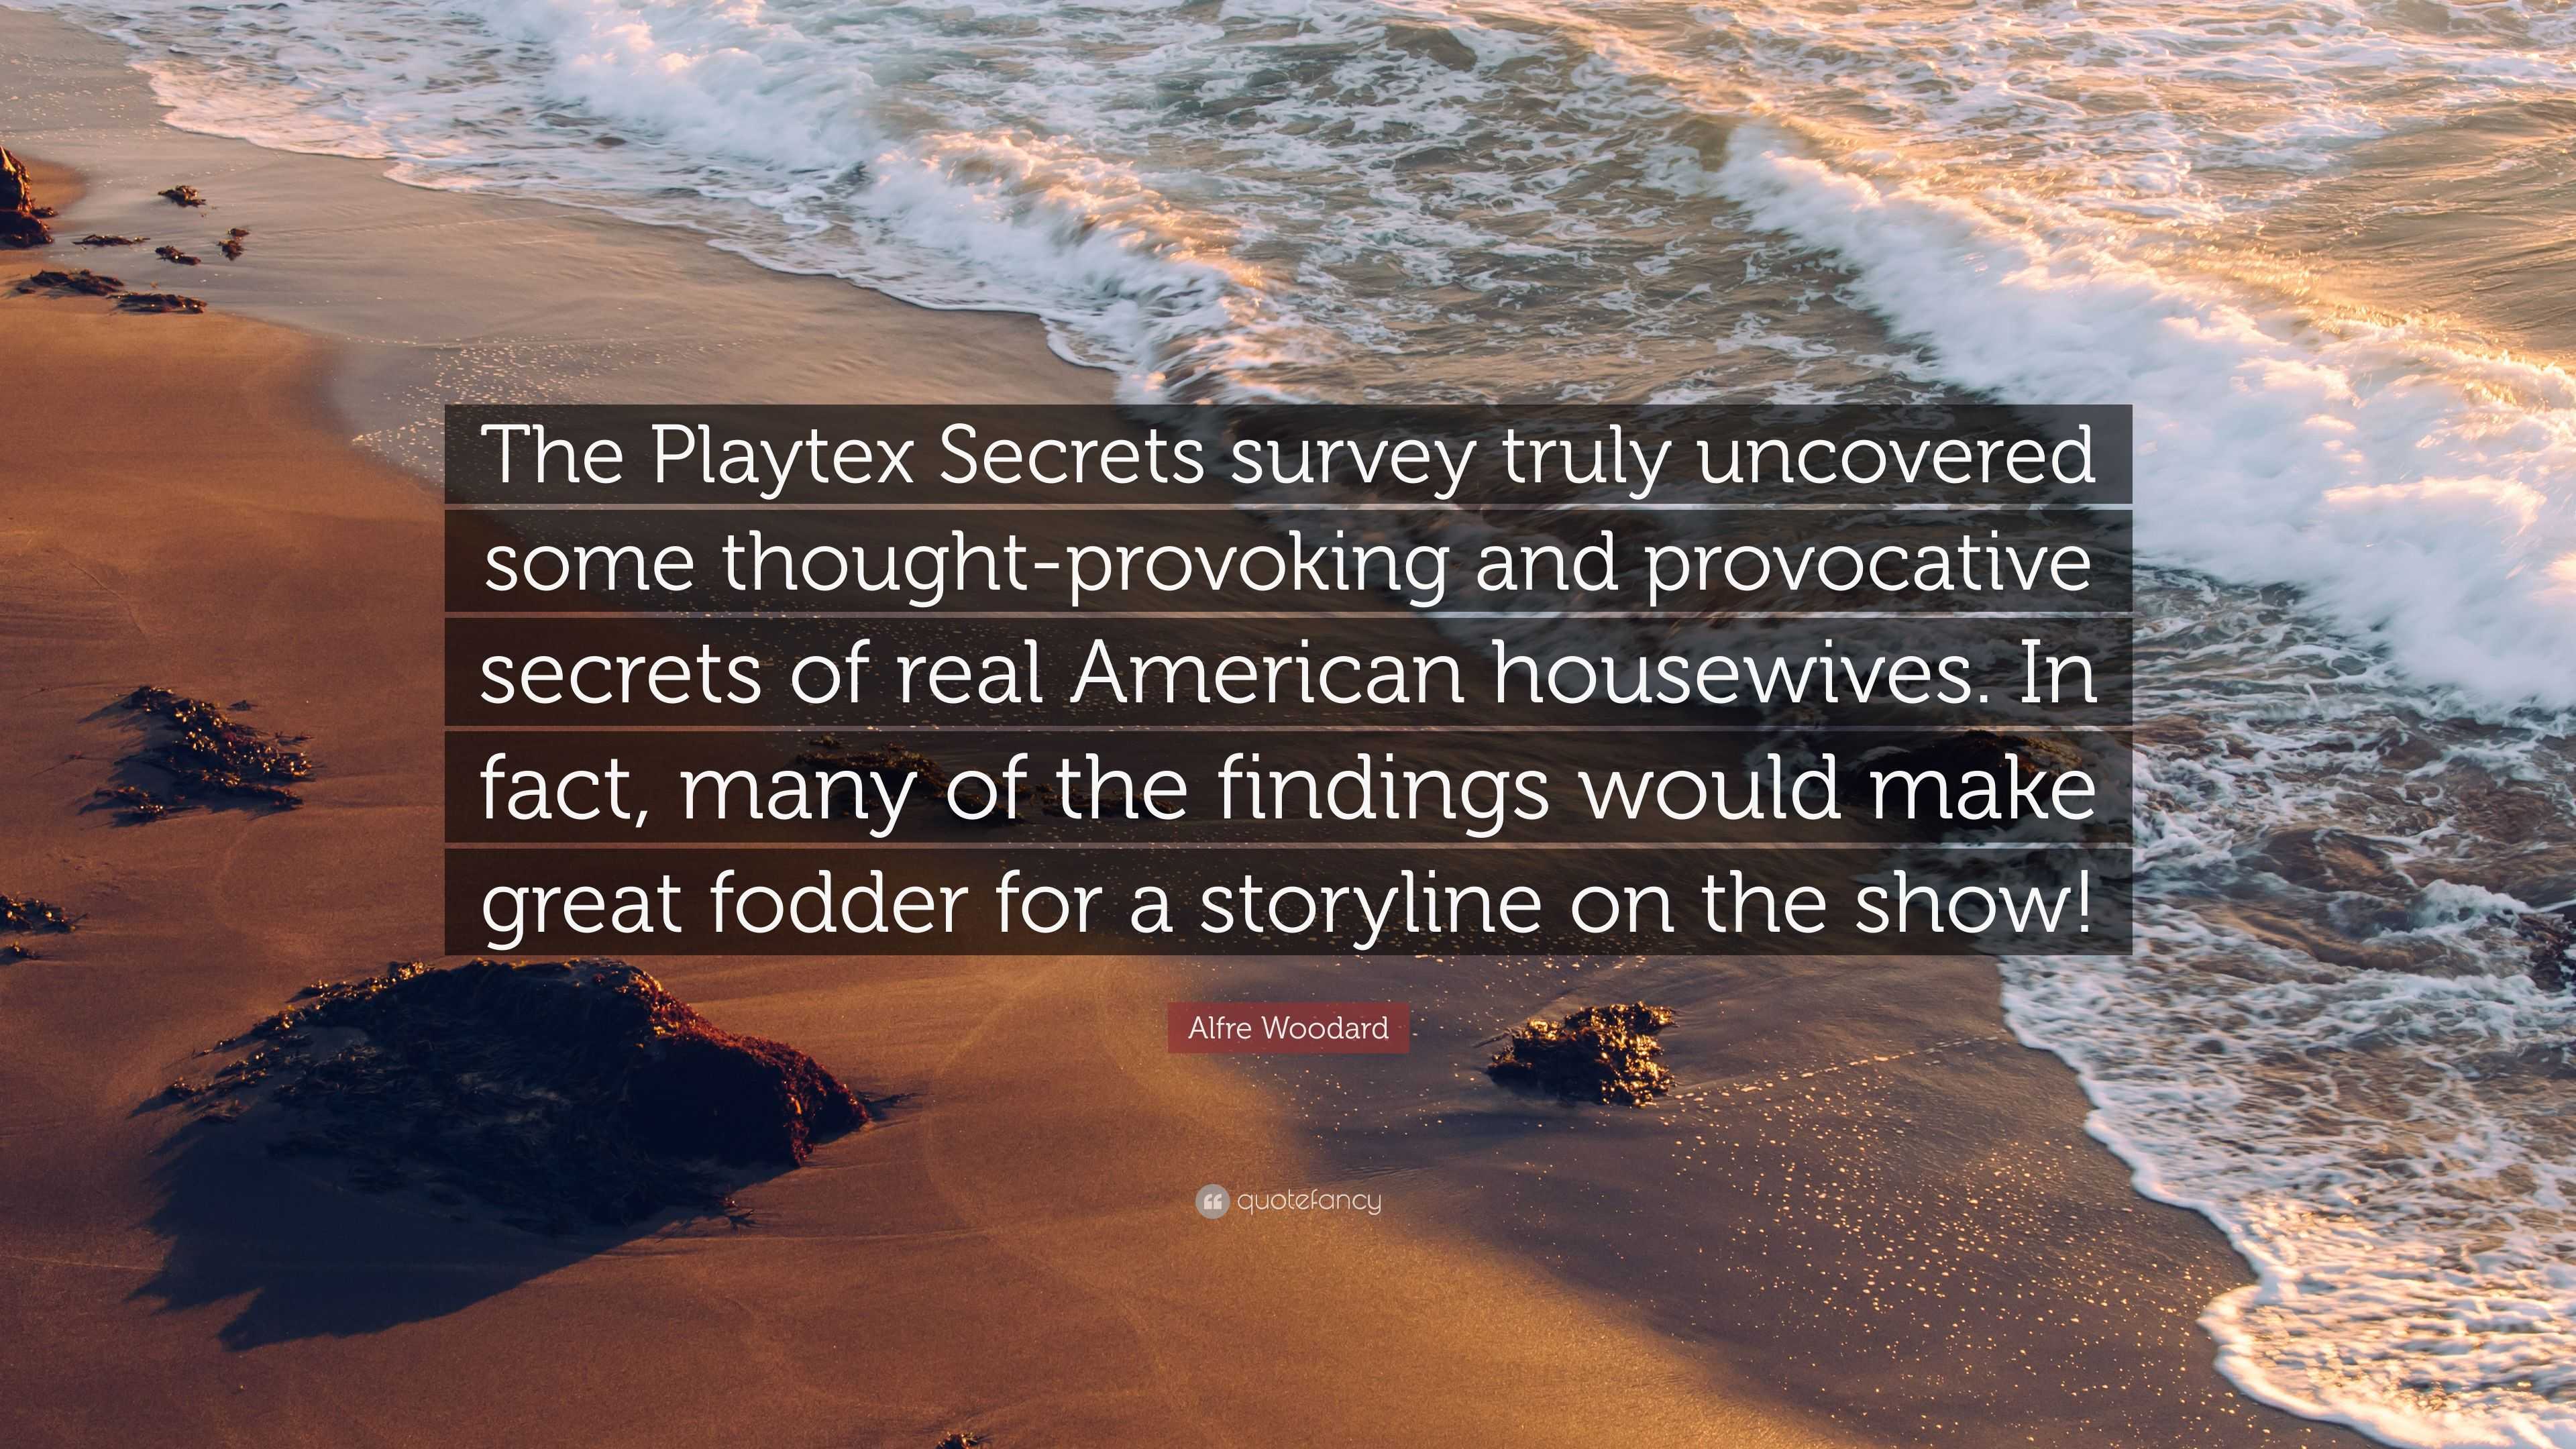 Alfre Woodard Quote: “The Playtex Secrets survey truly uncovered